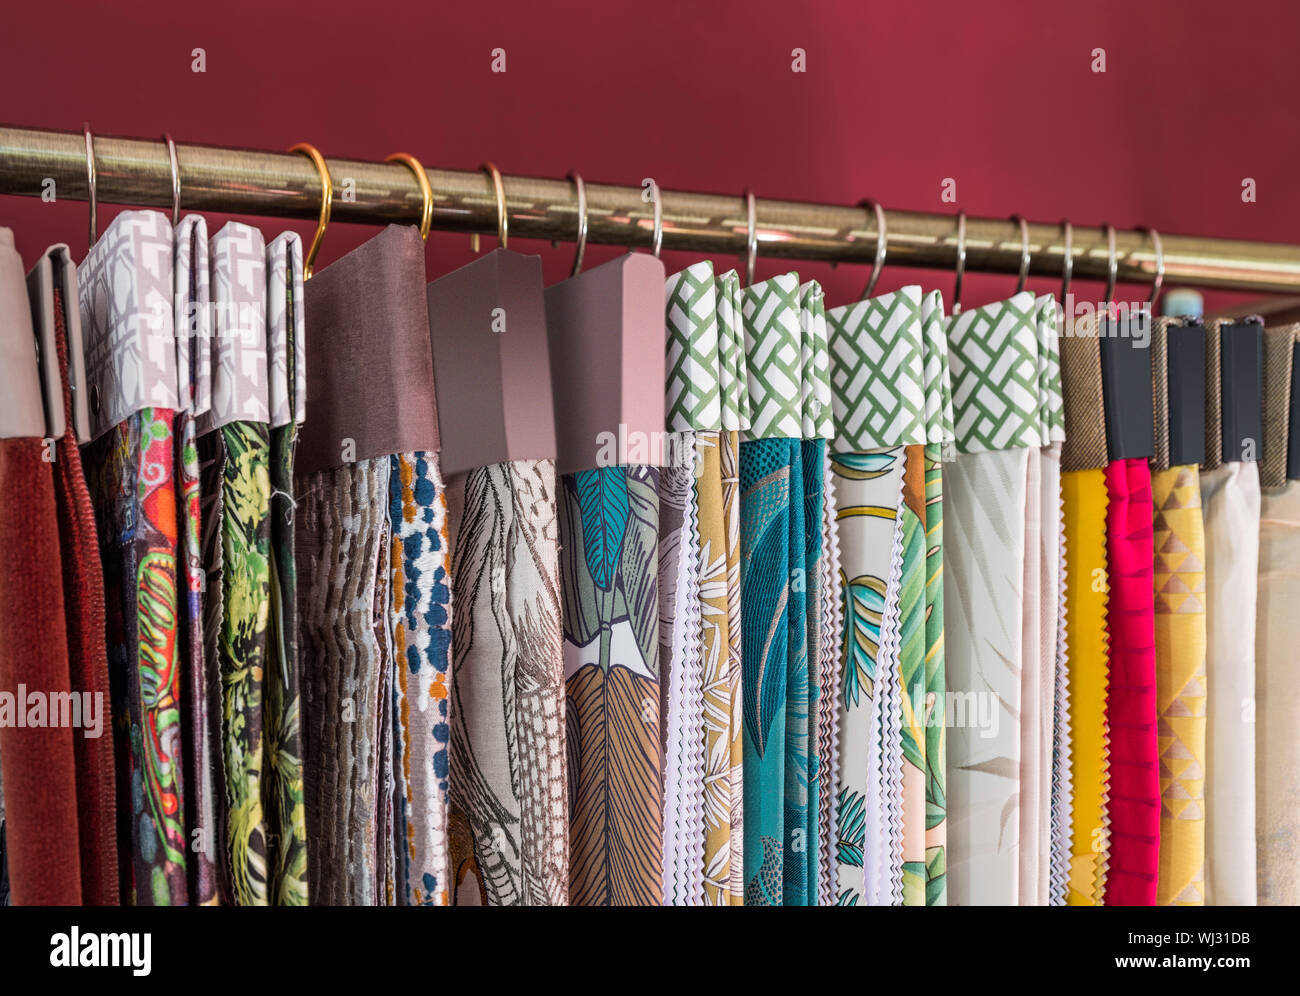 Fabric swatches in a fabric store Stock Photo